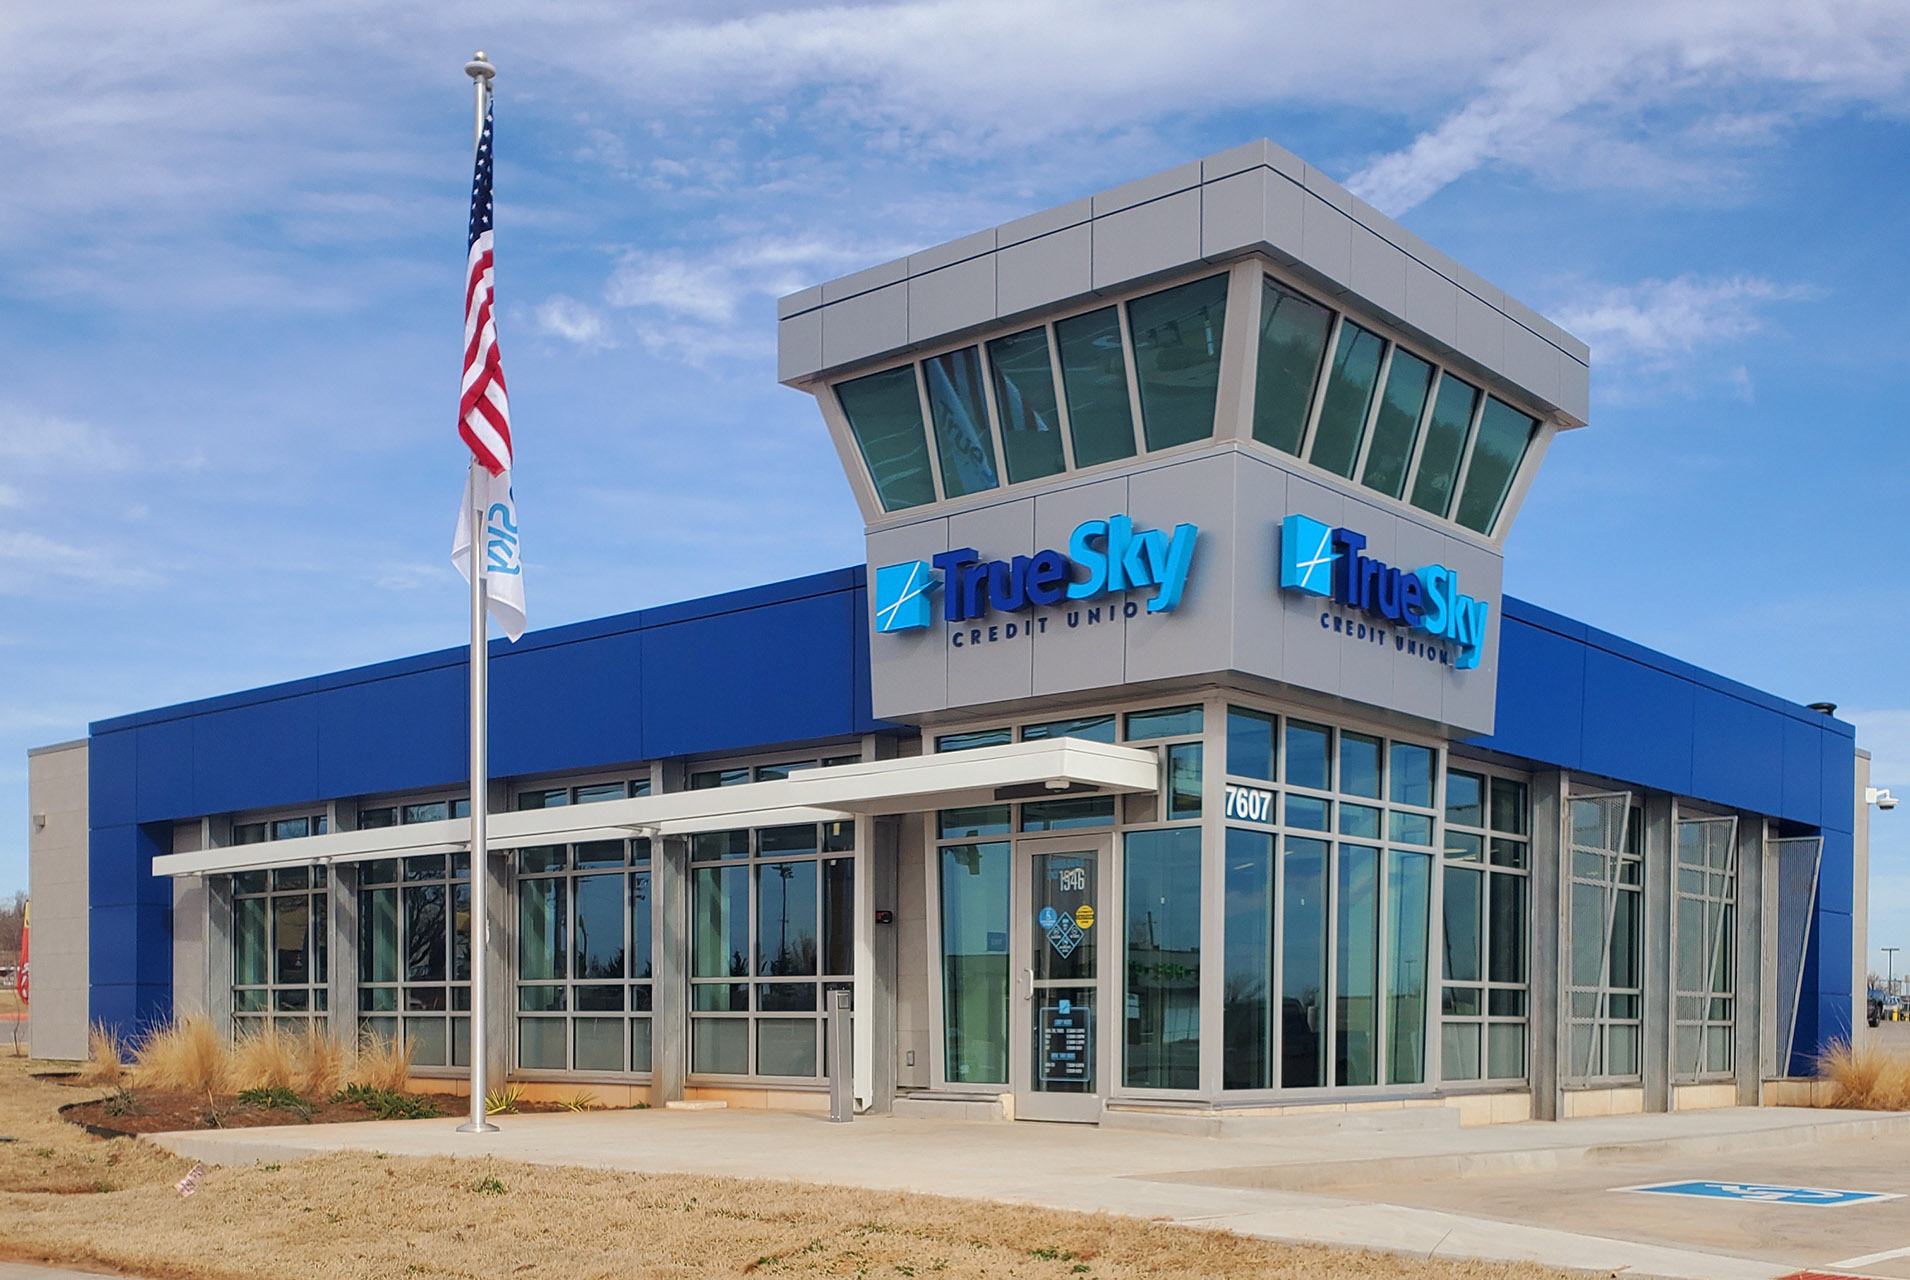 The grand opening of the new True Sky Federal Credit Union branch in Midwest City is on May 20th, 2023 with lots of fun.